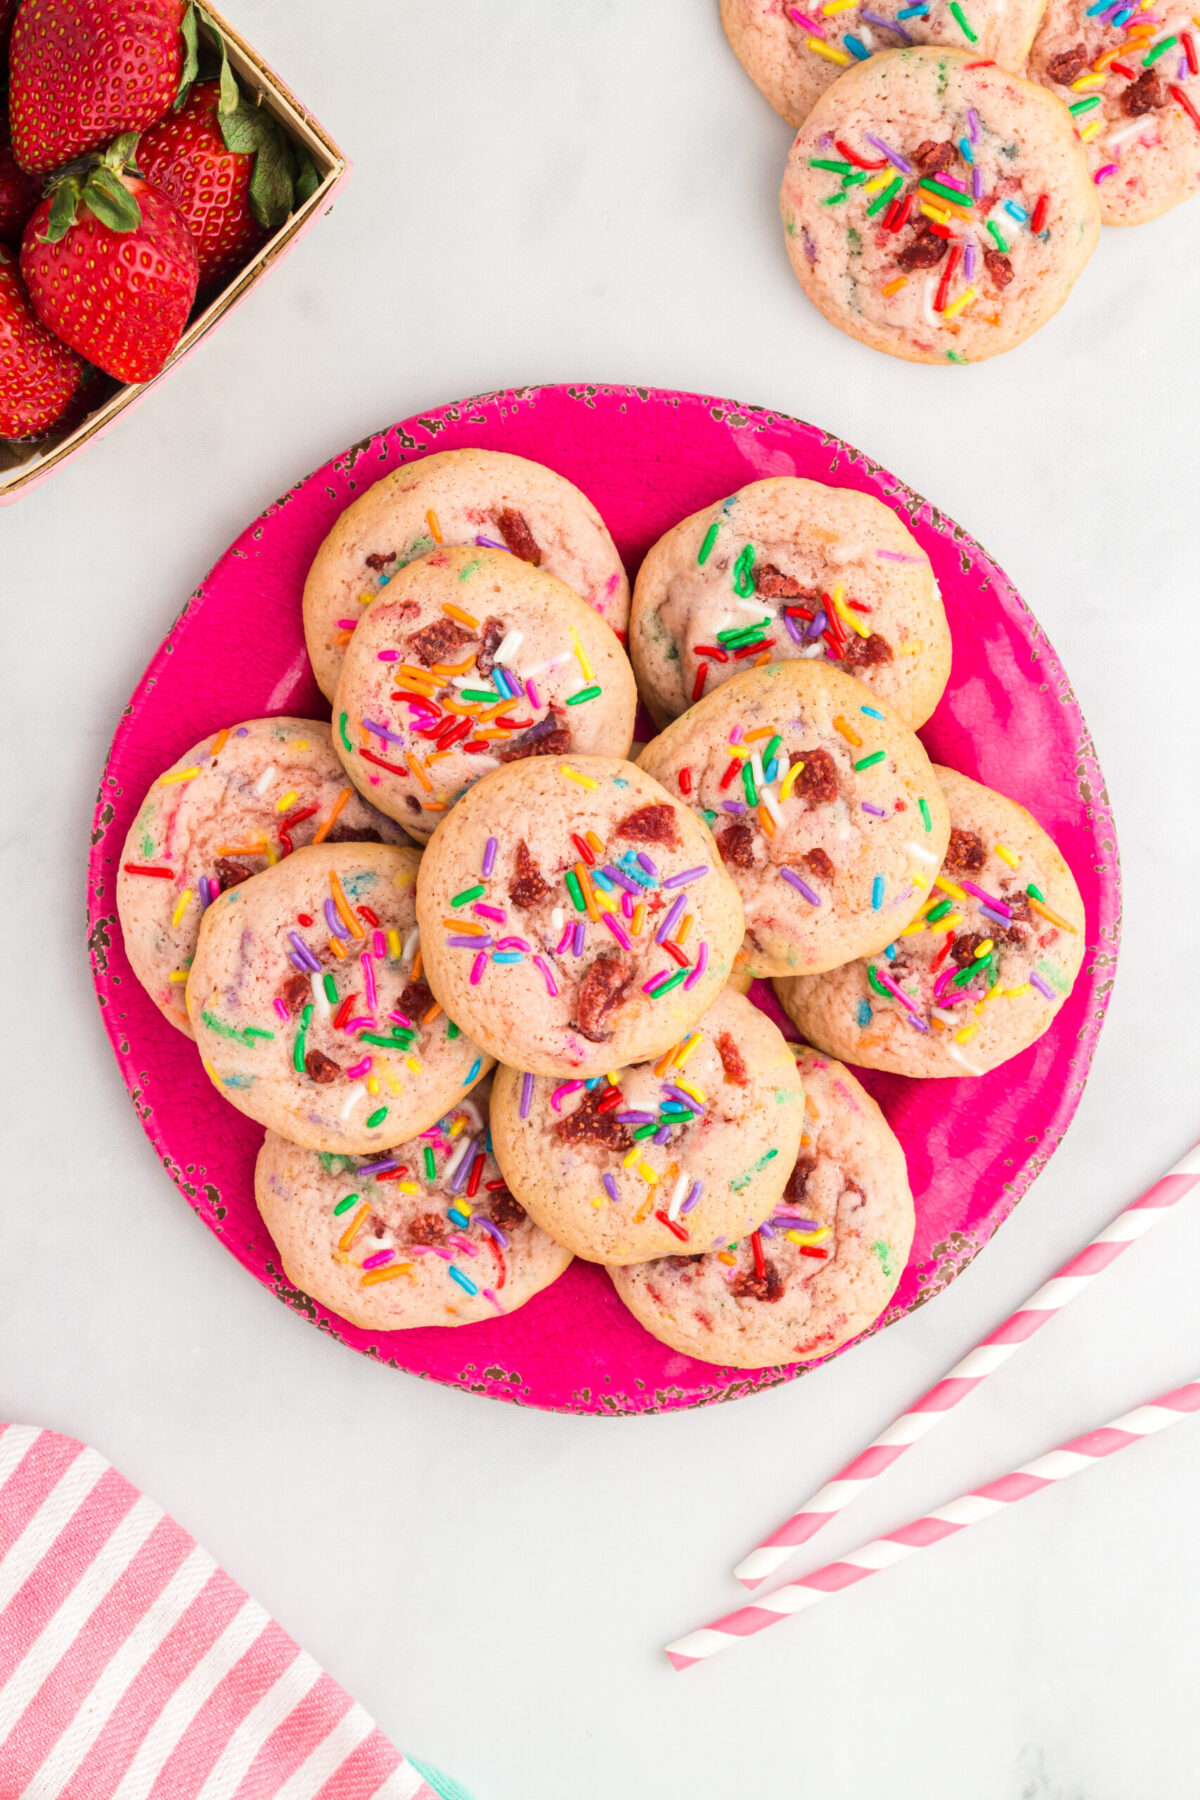 stack of strawberry milkshake cookies on a hot pink plate. 6 cookies on 1st layer, 4 on next layer and one top layer. top left corner strawberries peeking out, top right a cookie, bottom right red & white striped straws, bottom left red and white striped cloth peeking out.